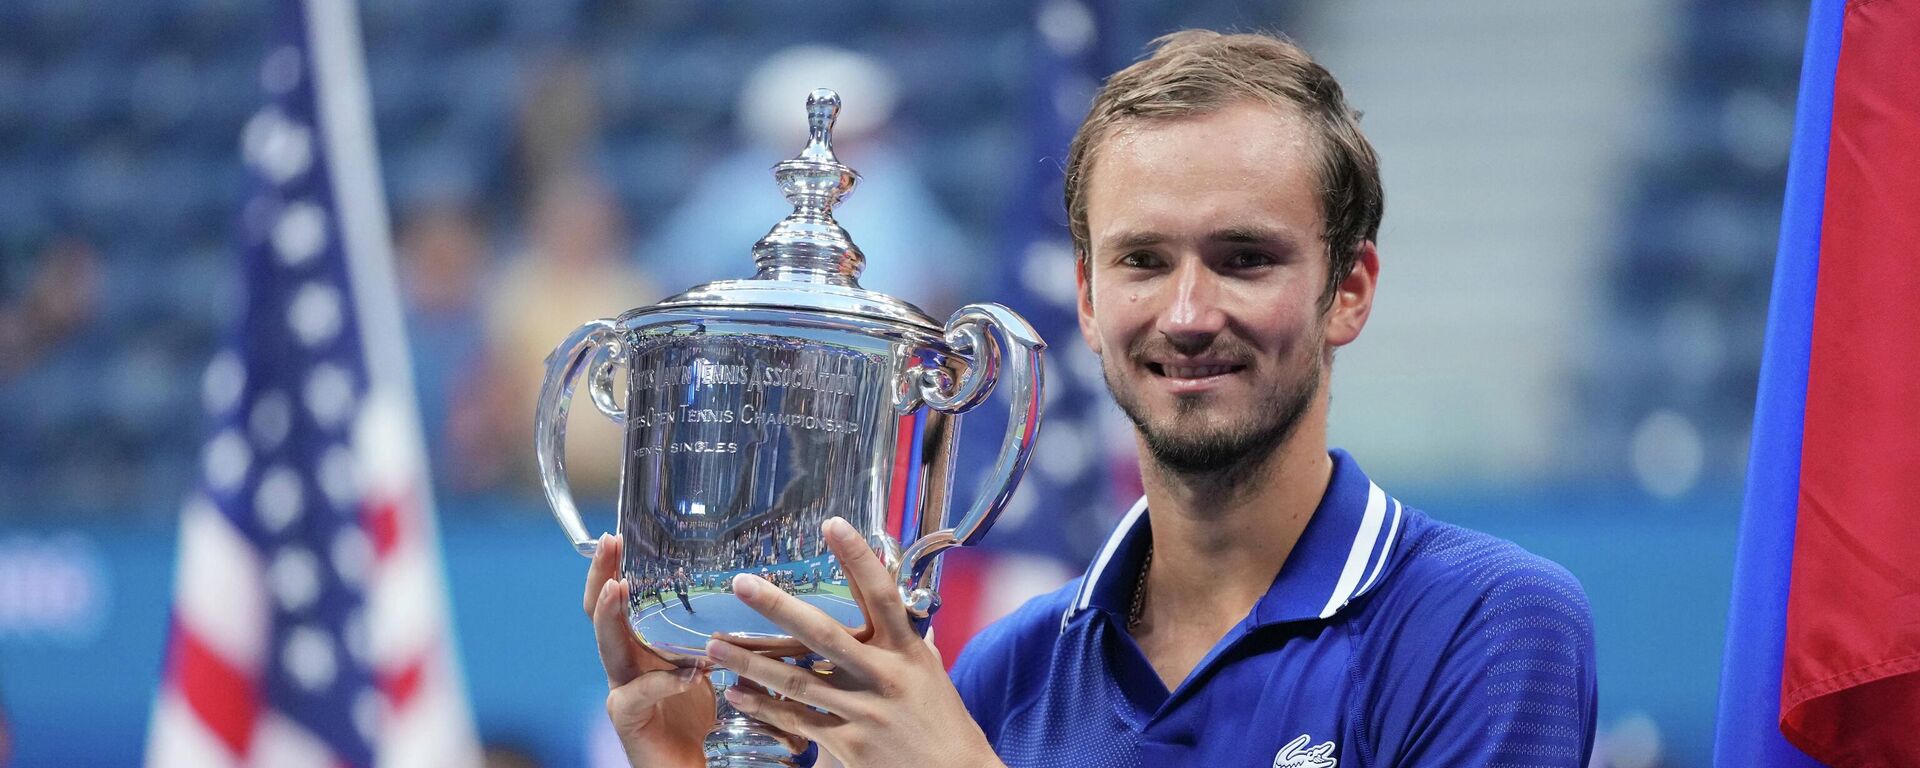 Sep 12, 2021; Flushing, NY, USA; Daniil Medvedev of Russia celebrates with the championship trophy after his match against Novak Djokovic of Serbia (not pictured) in the men's singles final on day fourteen of the 2021 U.S. Open tennis tournament at USTA Billie Jean King National Tennis Center. - Sputnik International, 1920, 12.09.2021